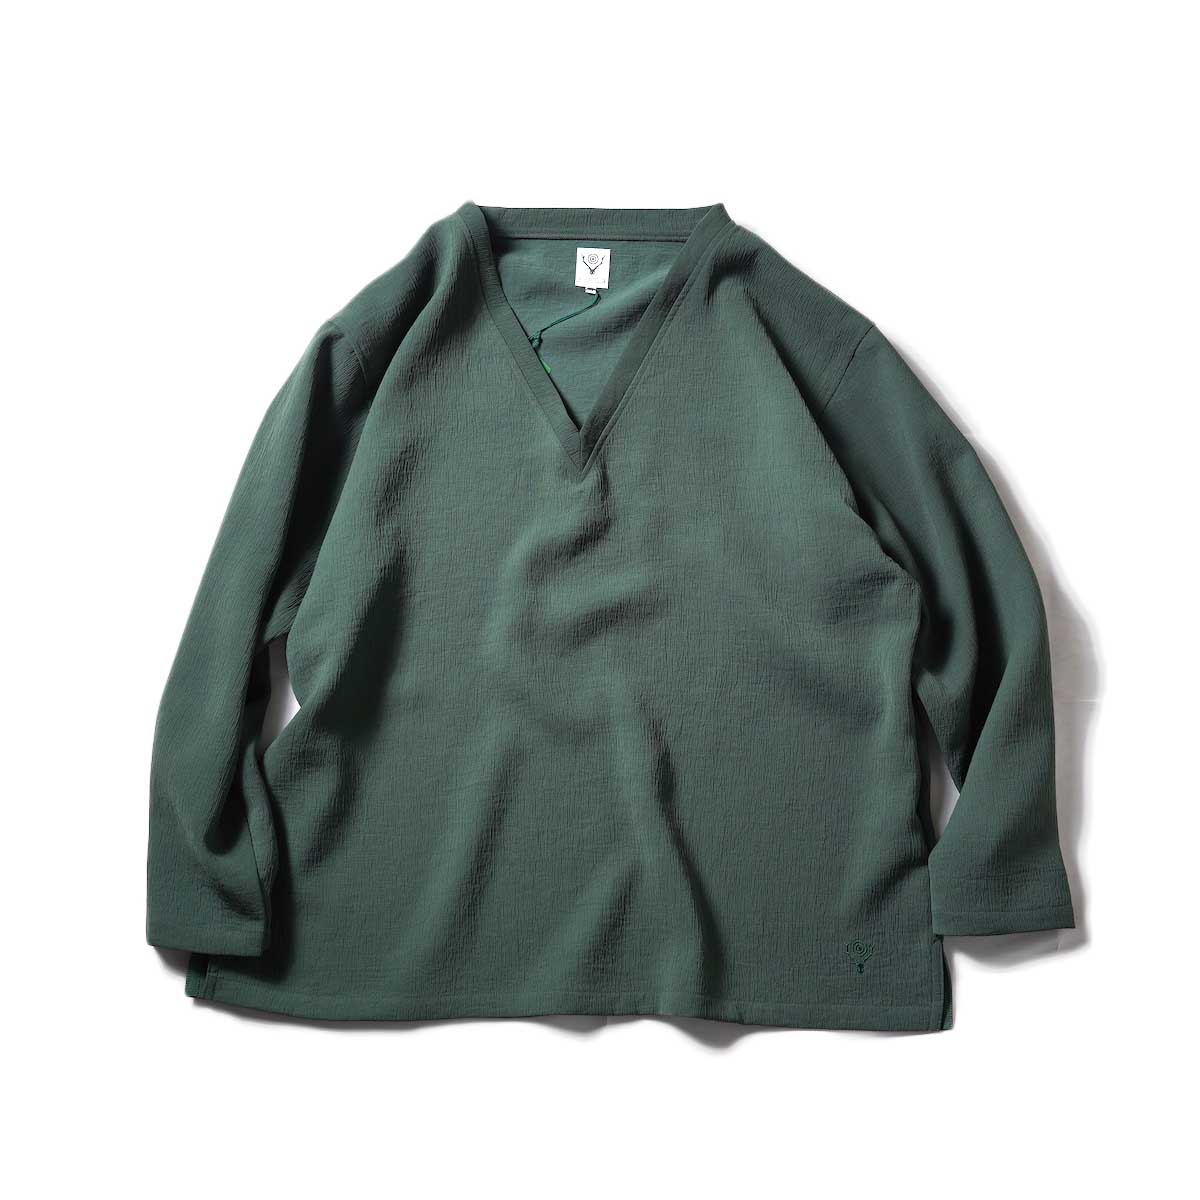 South2 West8 / S.S.V Neck Shirt - Poly Crepe Double Cloth (Green)